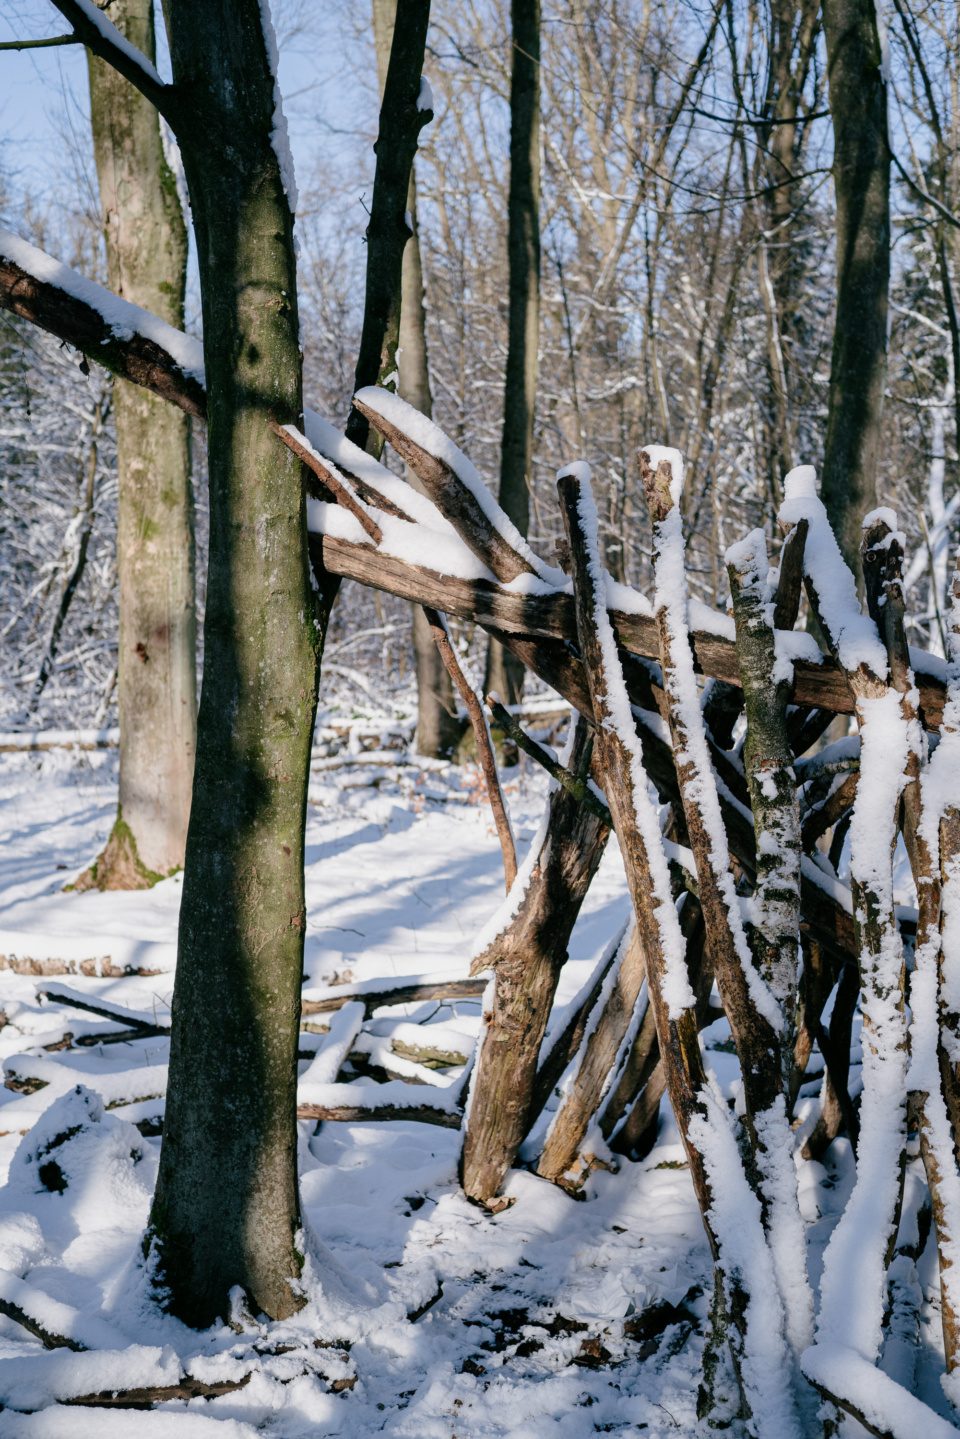 Shelter in forest in winter